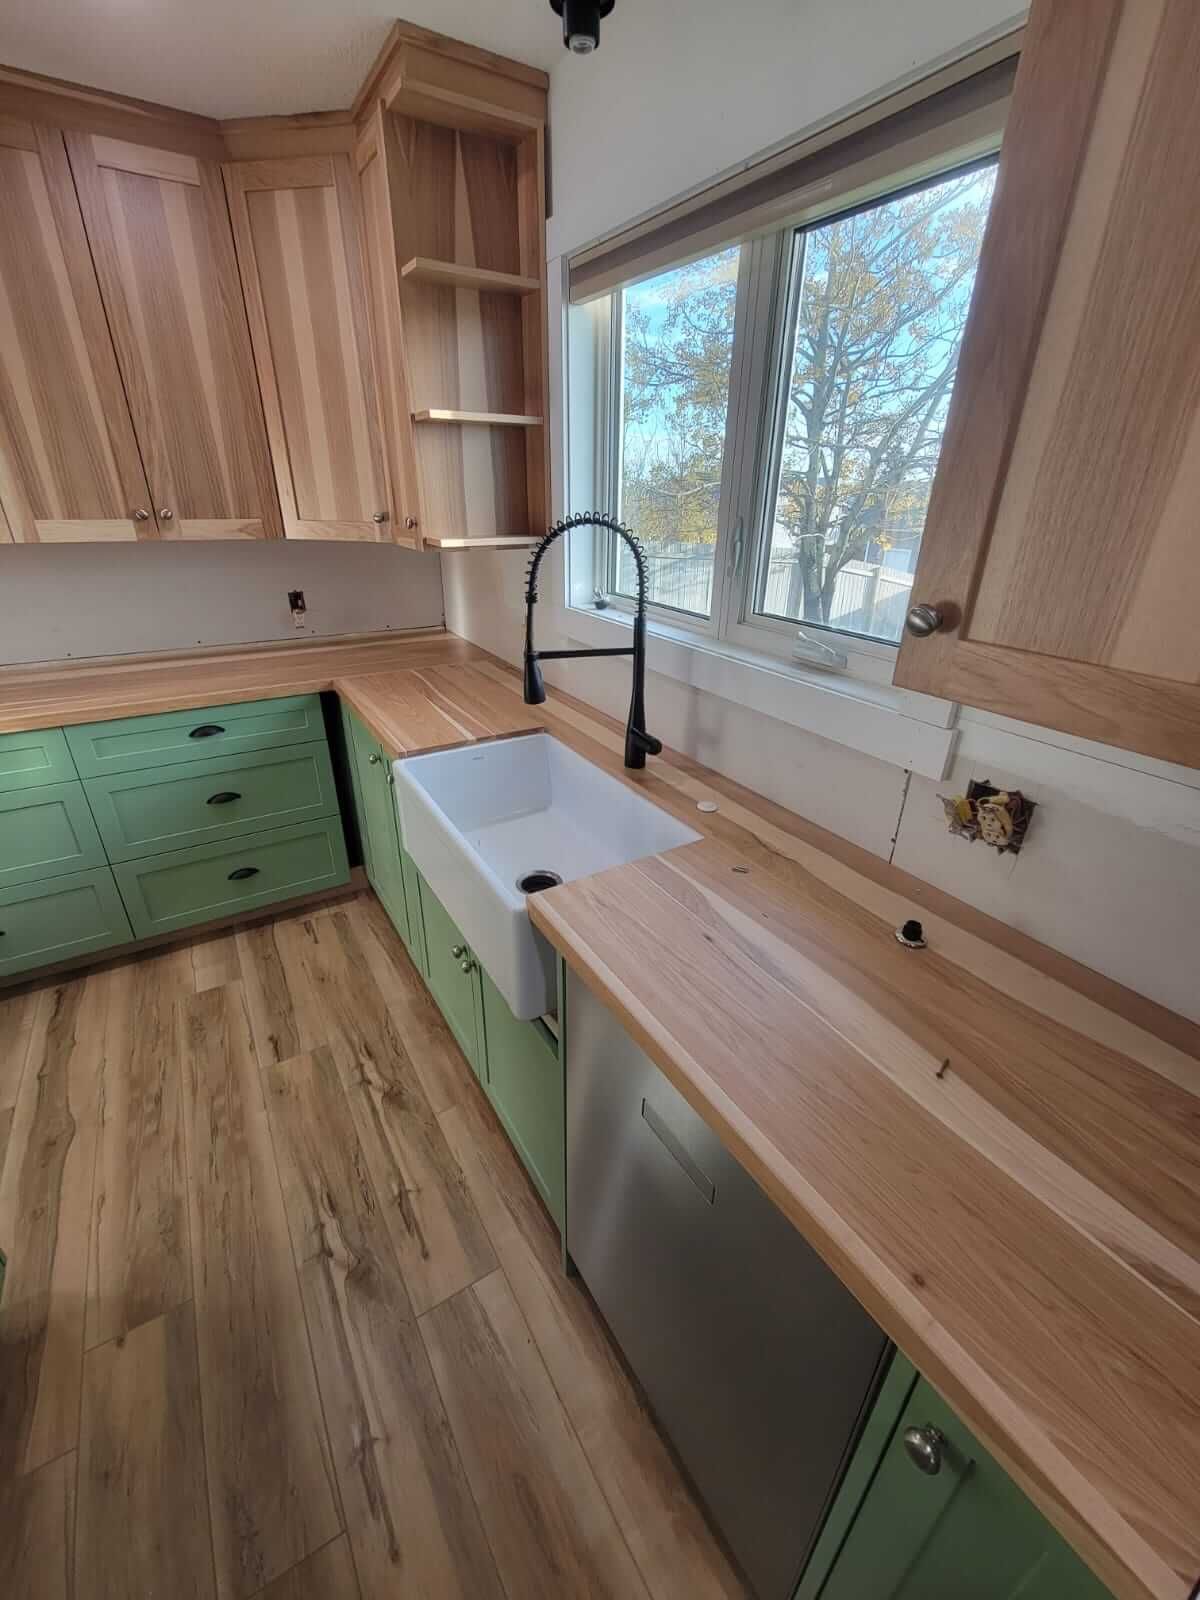 Kitchen with wooden counter top